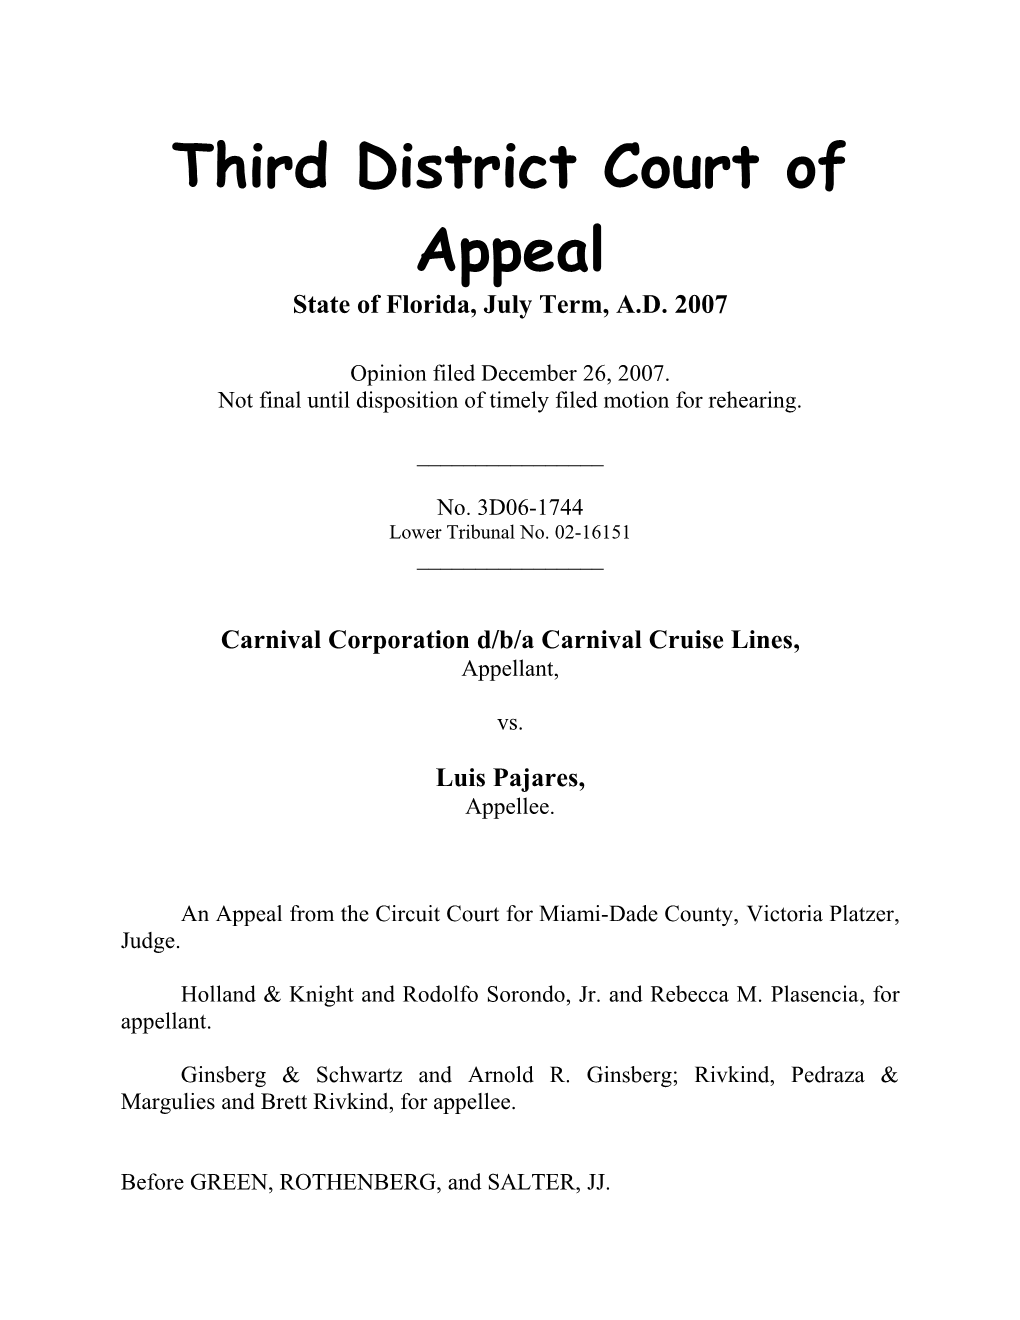 Third District Court of Appeal s1